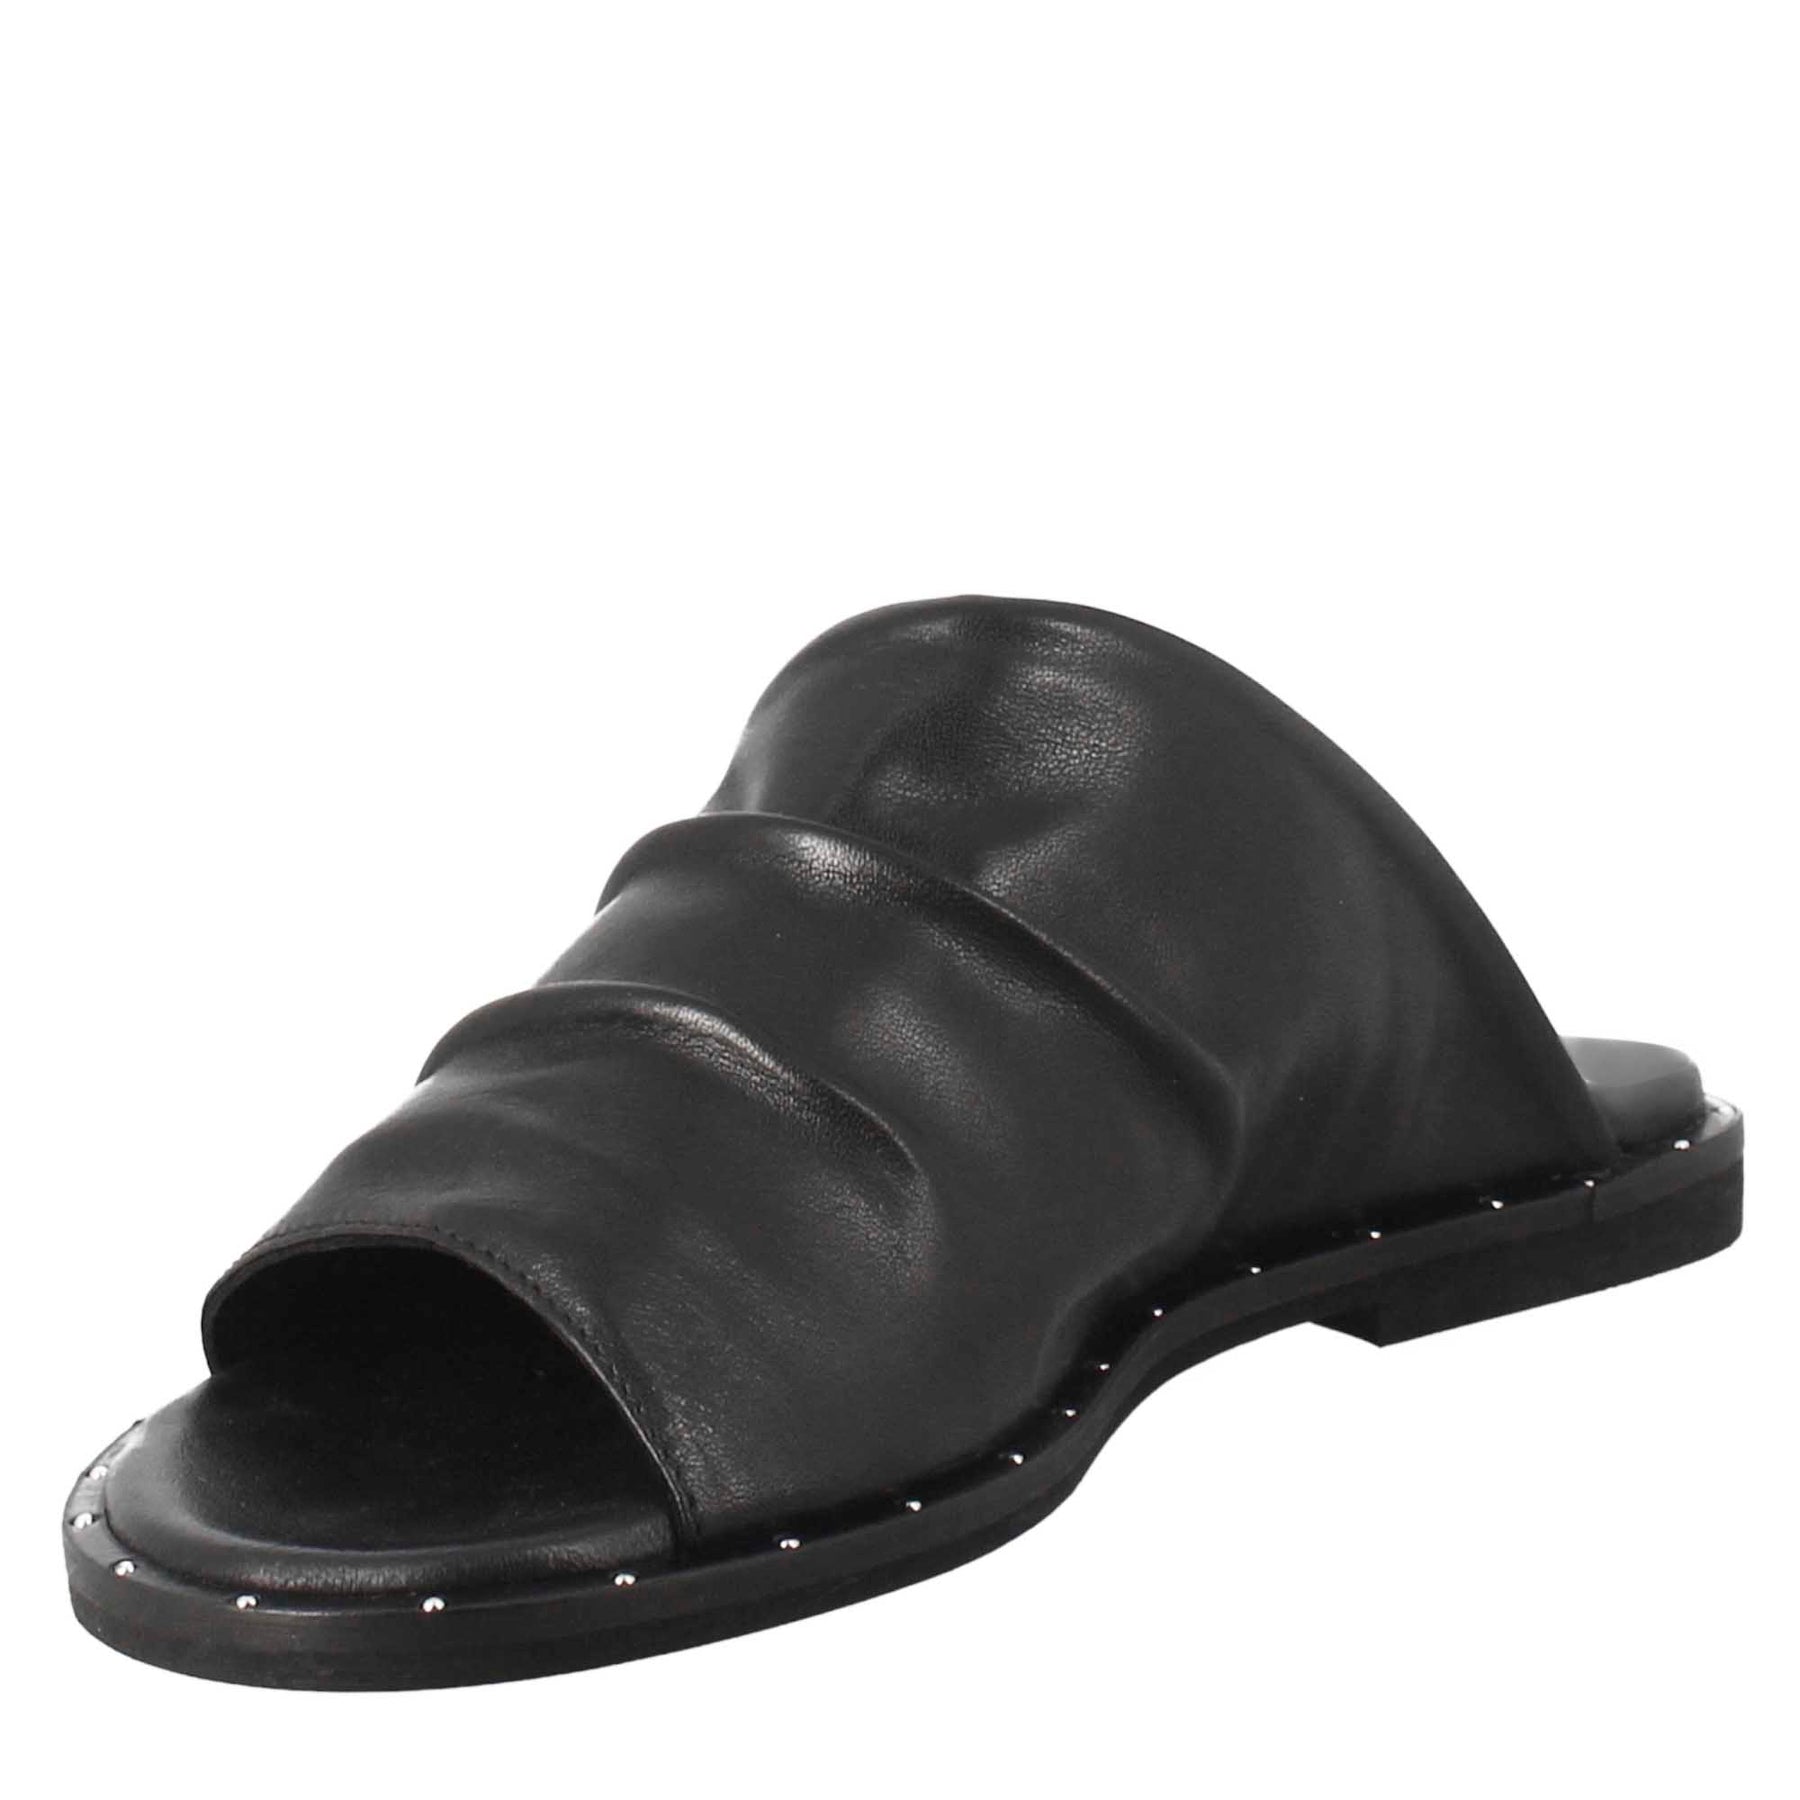 Women's band sandal in black leather